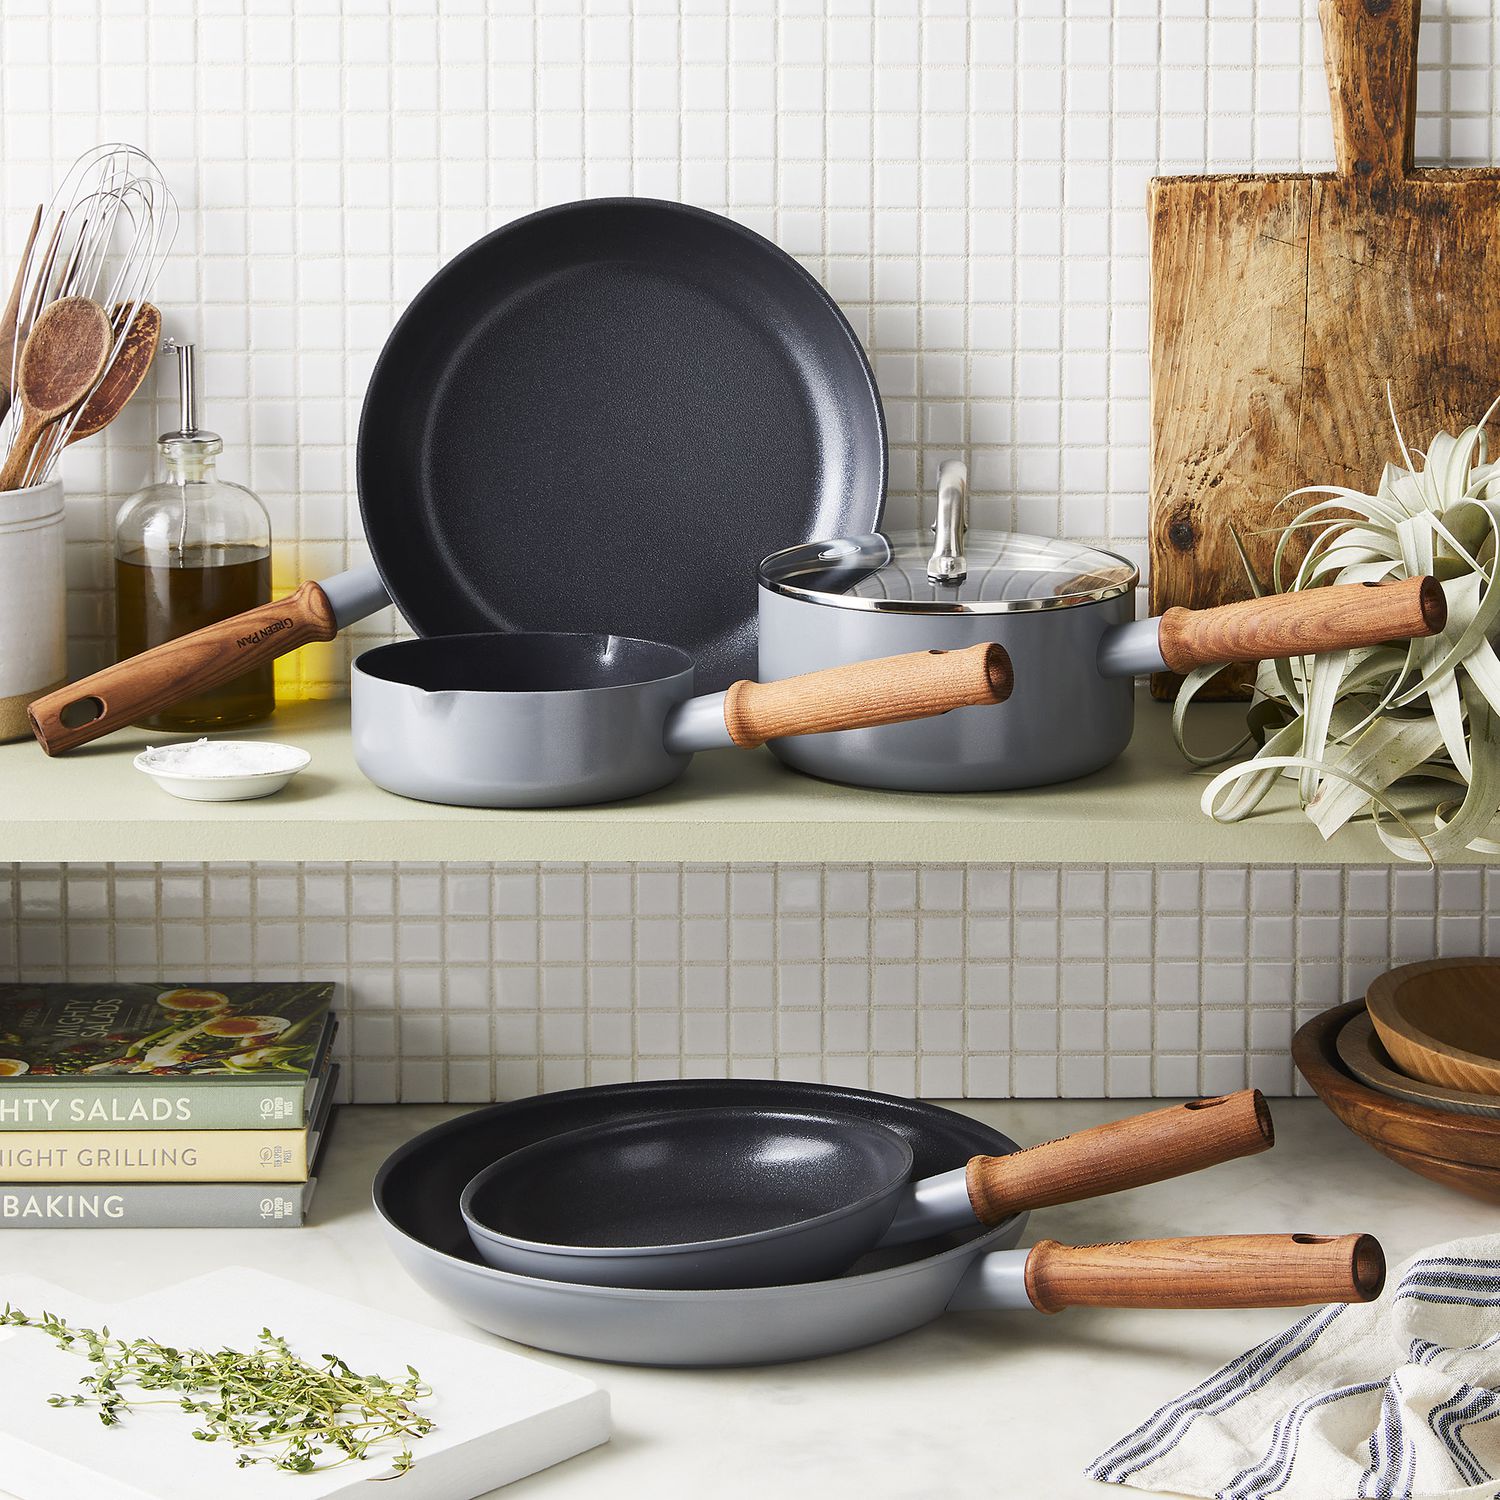 Food52 x GreenPan Ceramic Nonstick Wooden-Handled Cookware Collection